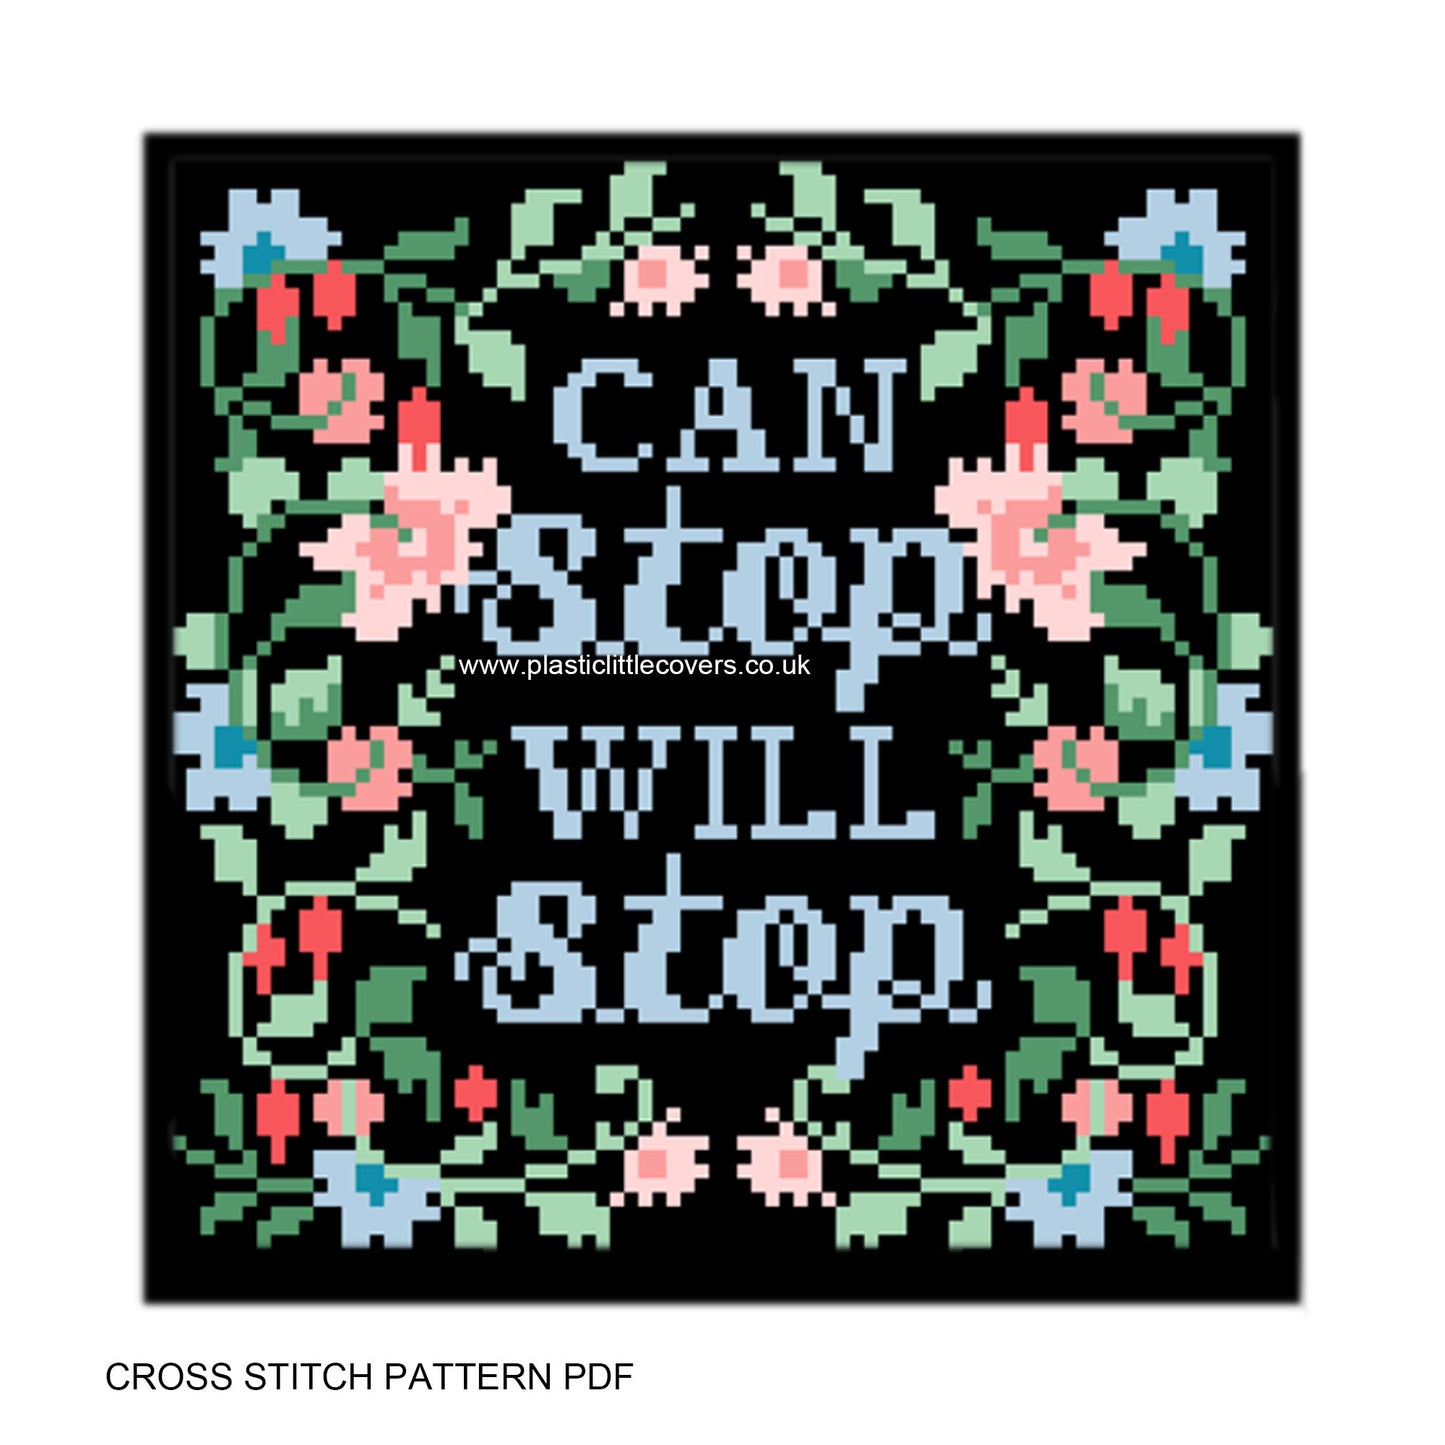 Can Stop Will Stop - Cross Stitch Pattern PDF.